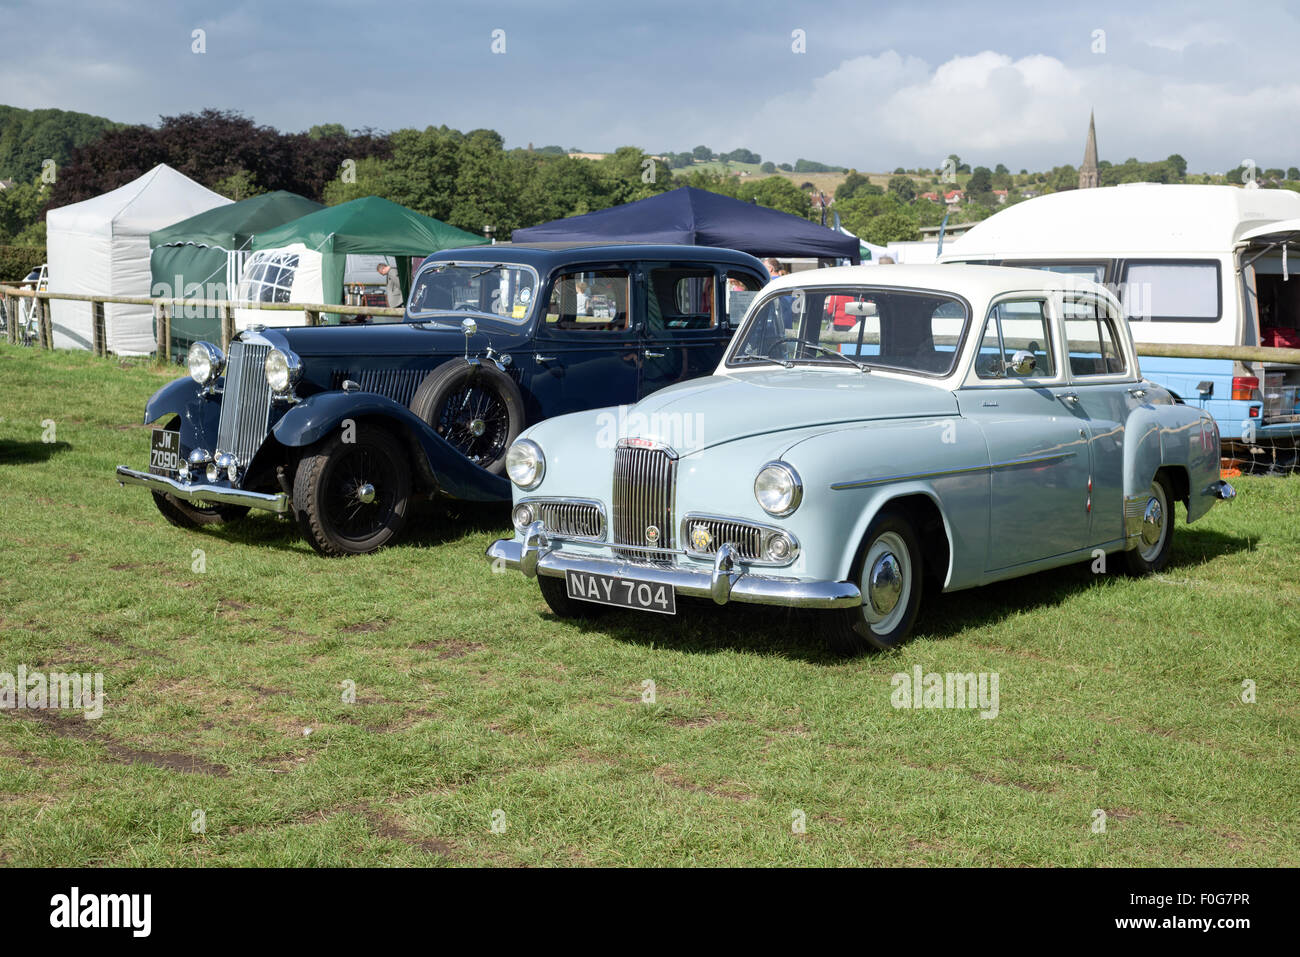 Bakewell, Derbyshire, UK. 15th Aug, 2015. Huge crowds turn out for the annual Bakewell baking festival, Baking lesson's, Vintage car's, and many baking related stalls. Credit:  IFIMAGE/Alamy Live News Stock Photo